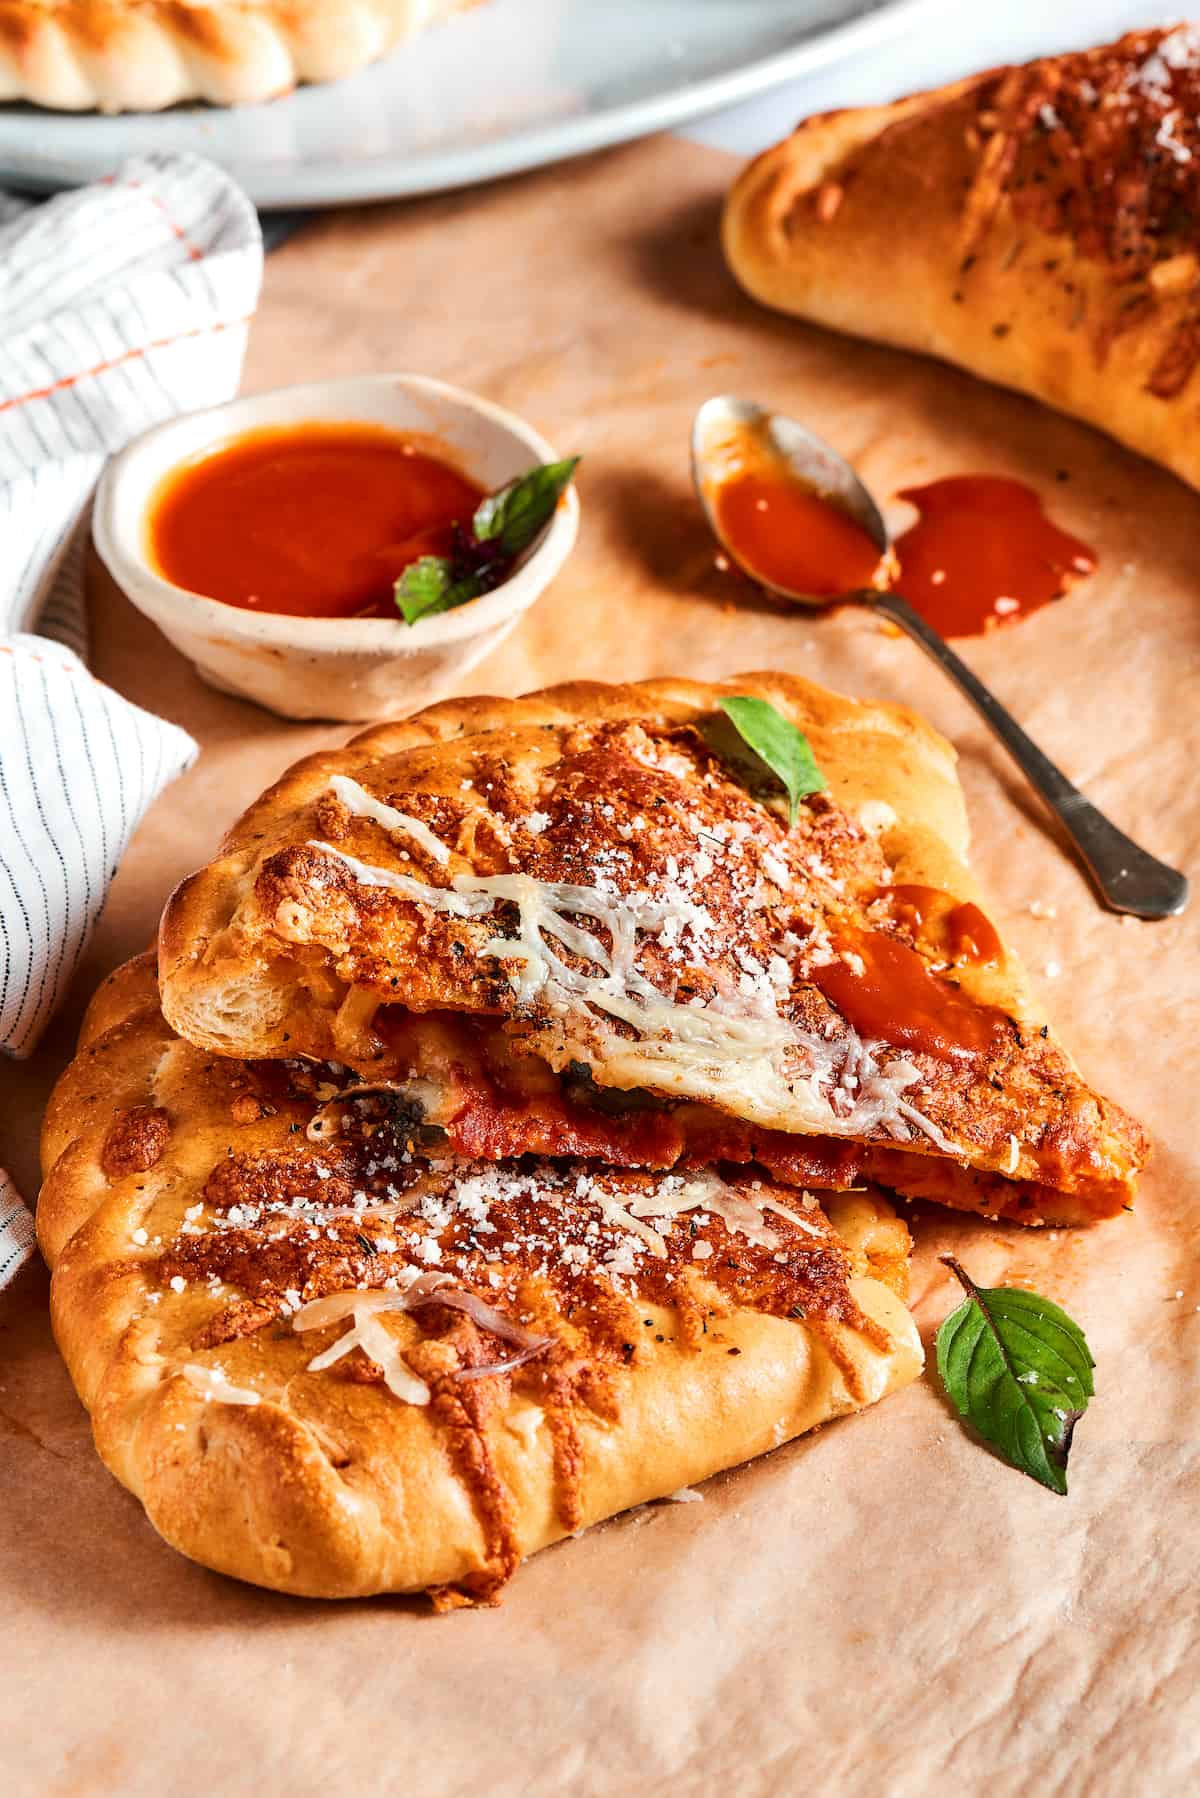 A pizza pocket cut in half to show the cheesy filling.